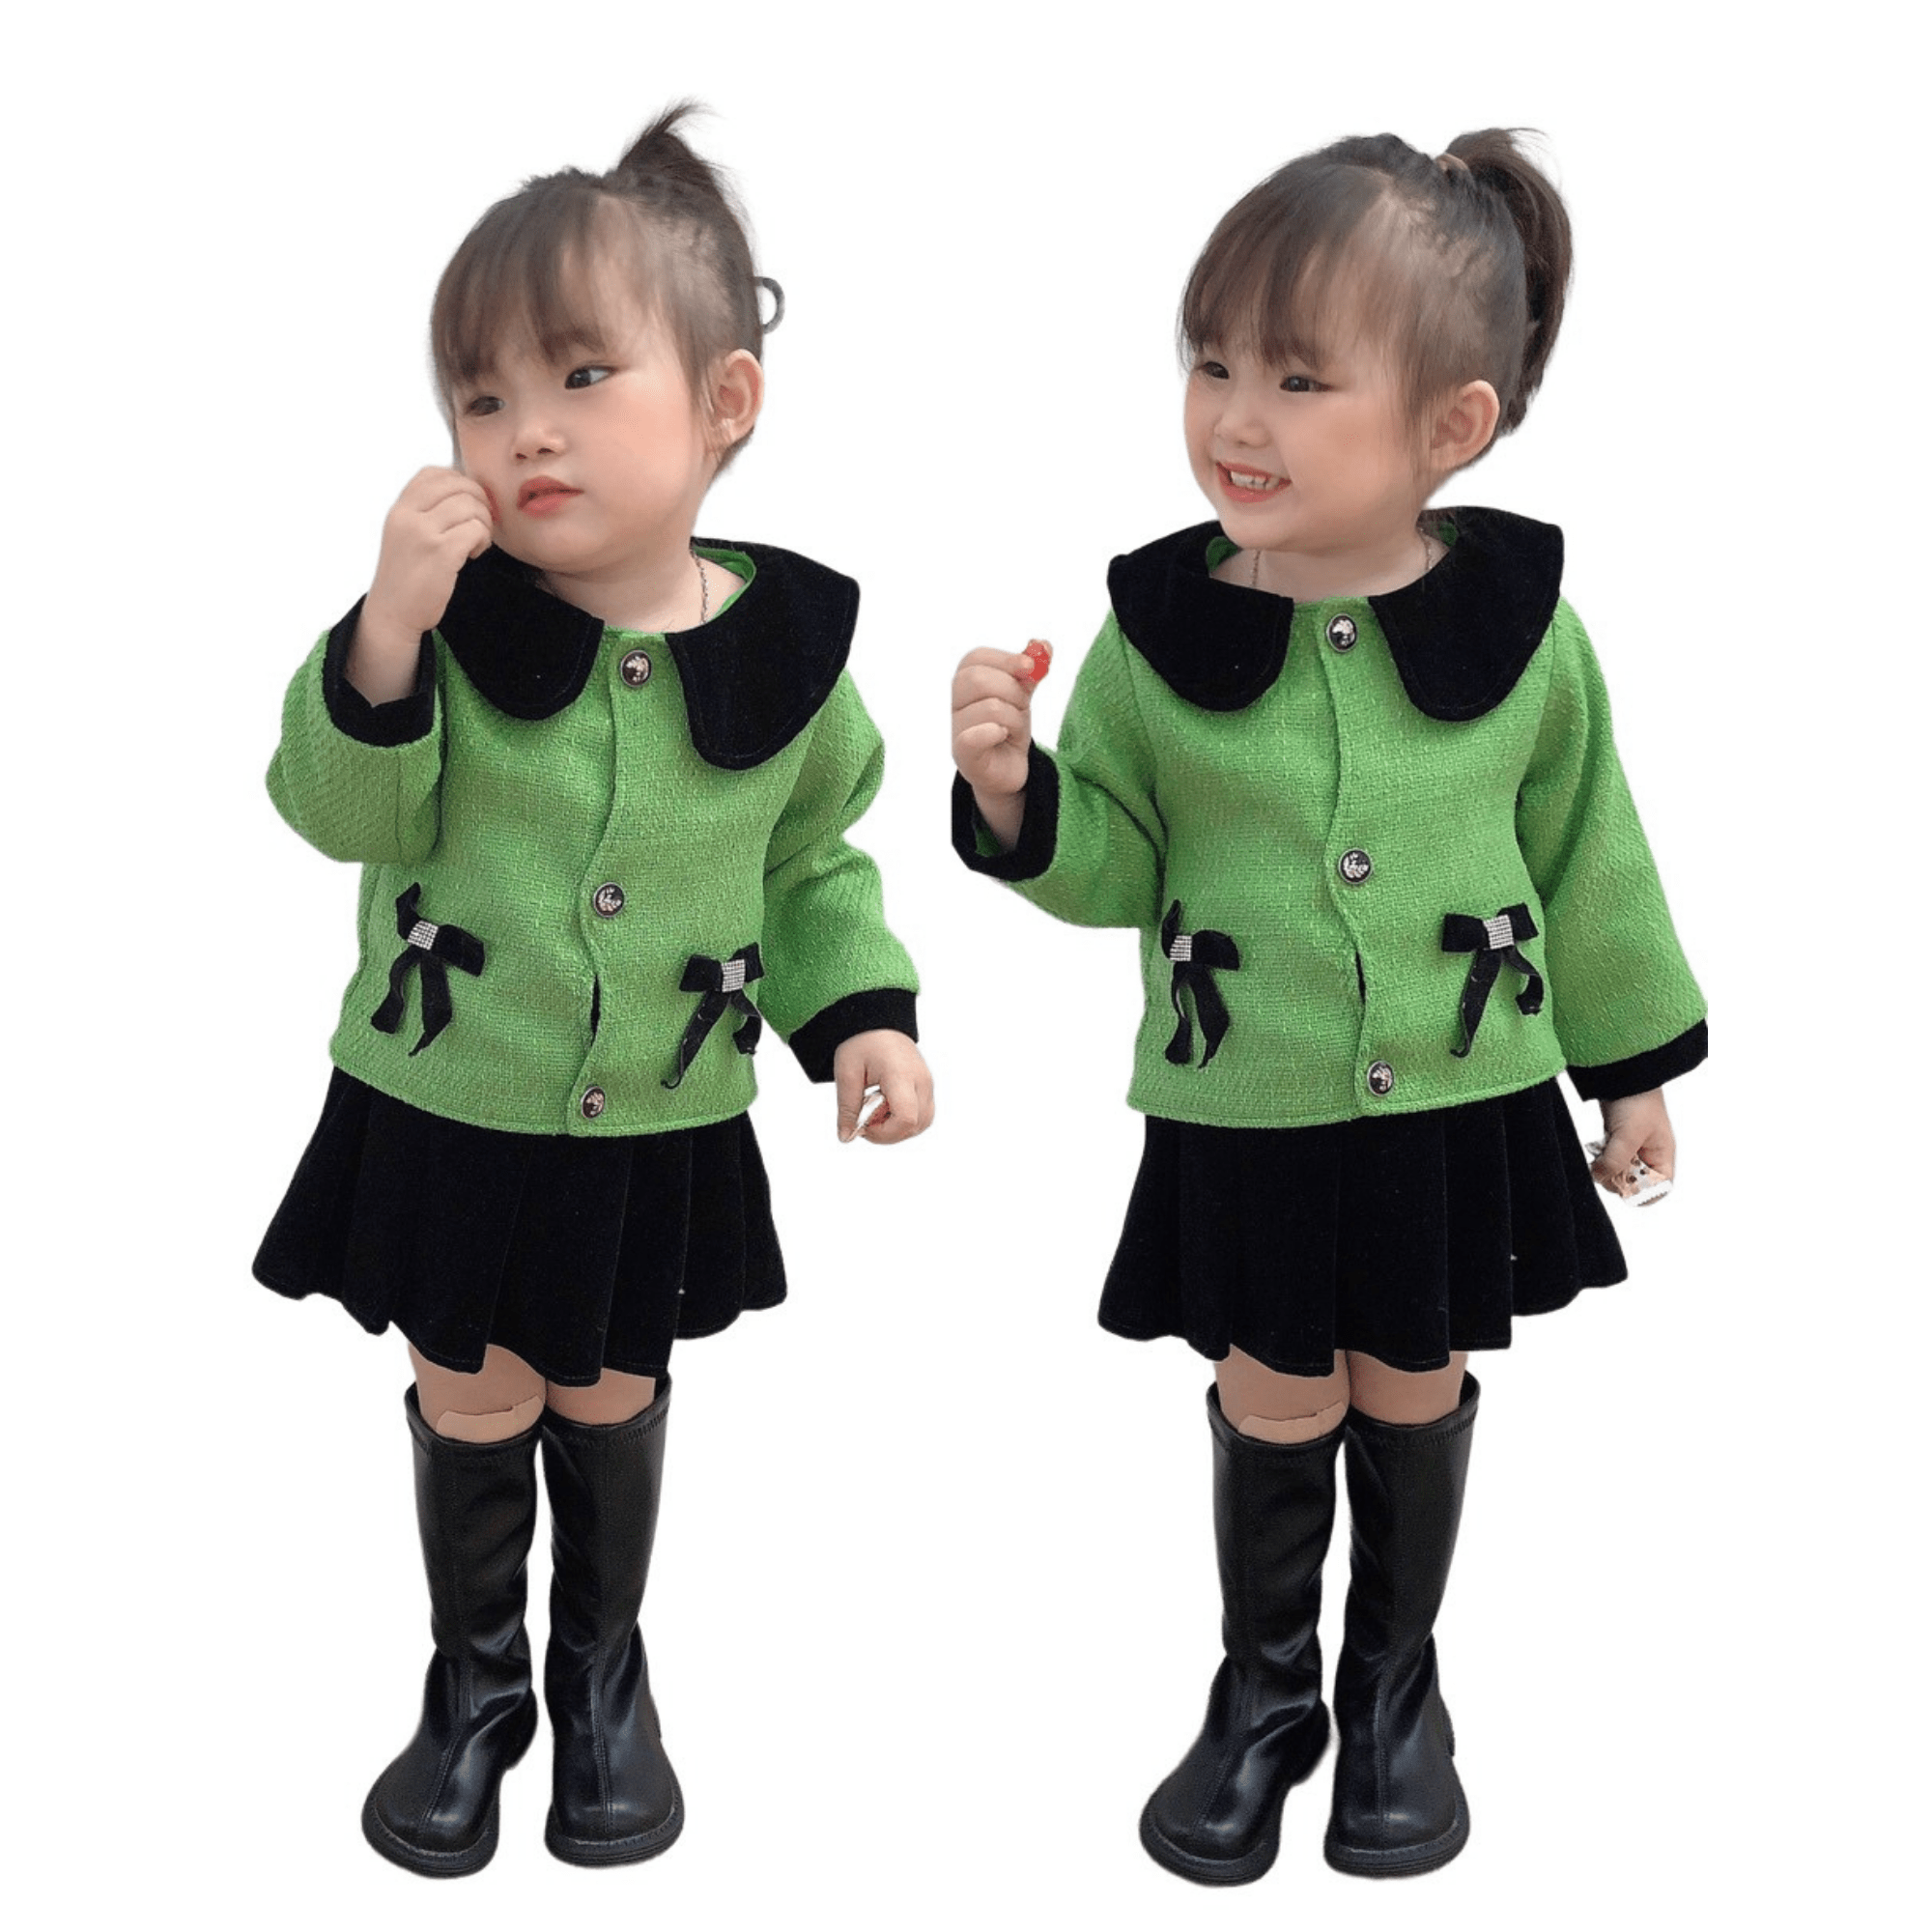 Kids Clothes Girls Customized Service 100% Wool Dresses New Arrival Each One In Opp Bag Made In Vietnam Manufacturer